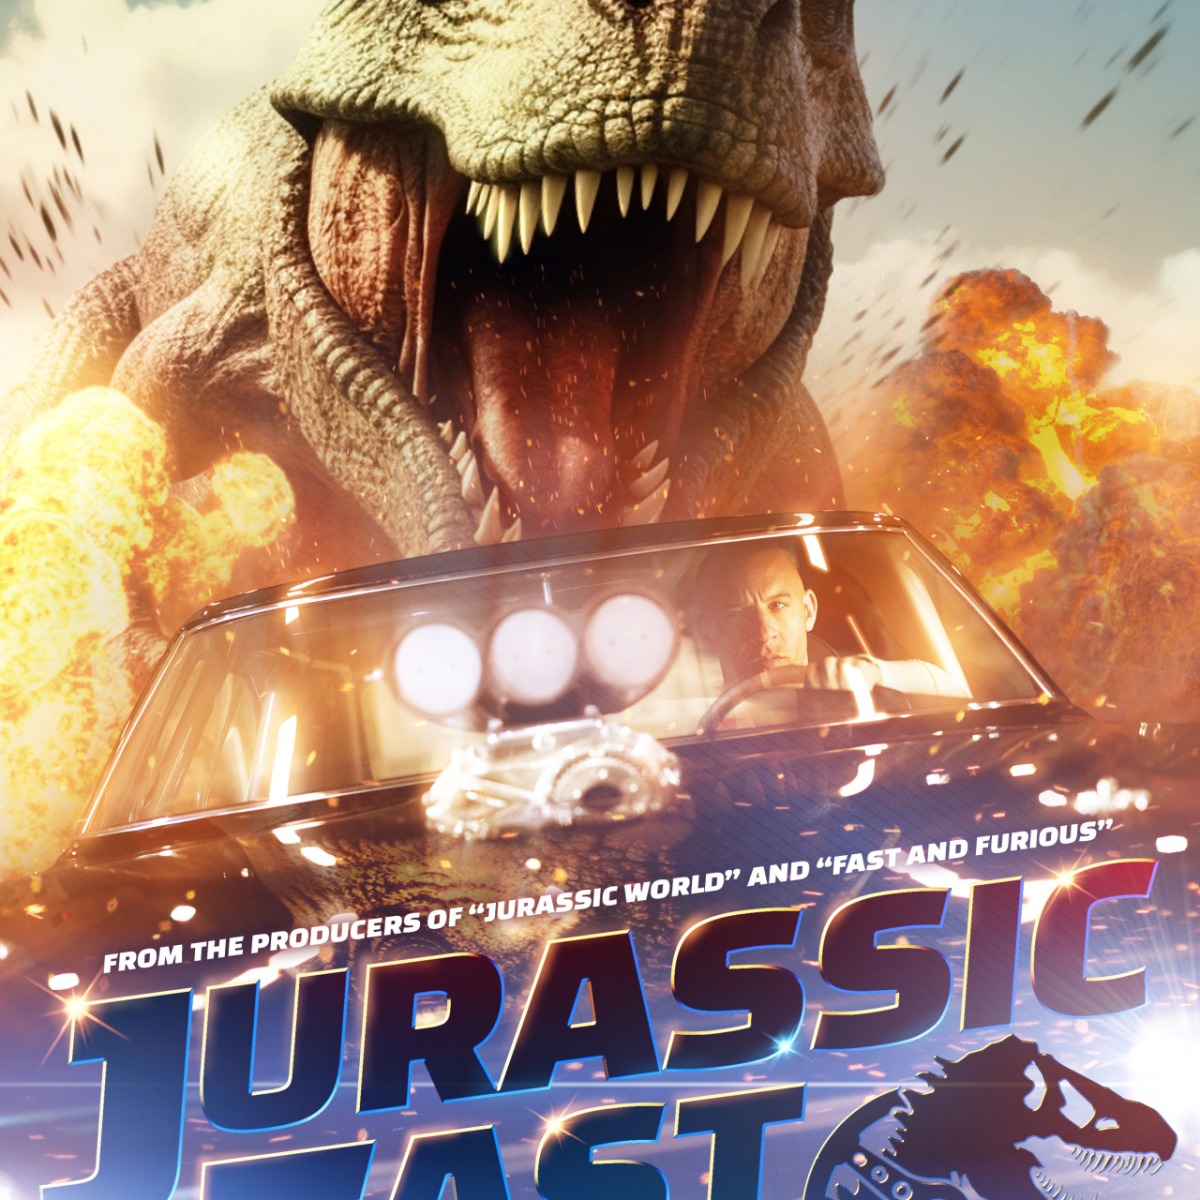 “Jurassic Fast” fanmade poster